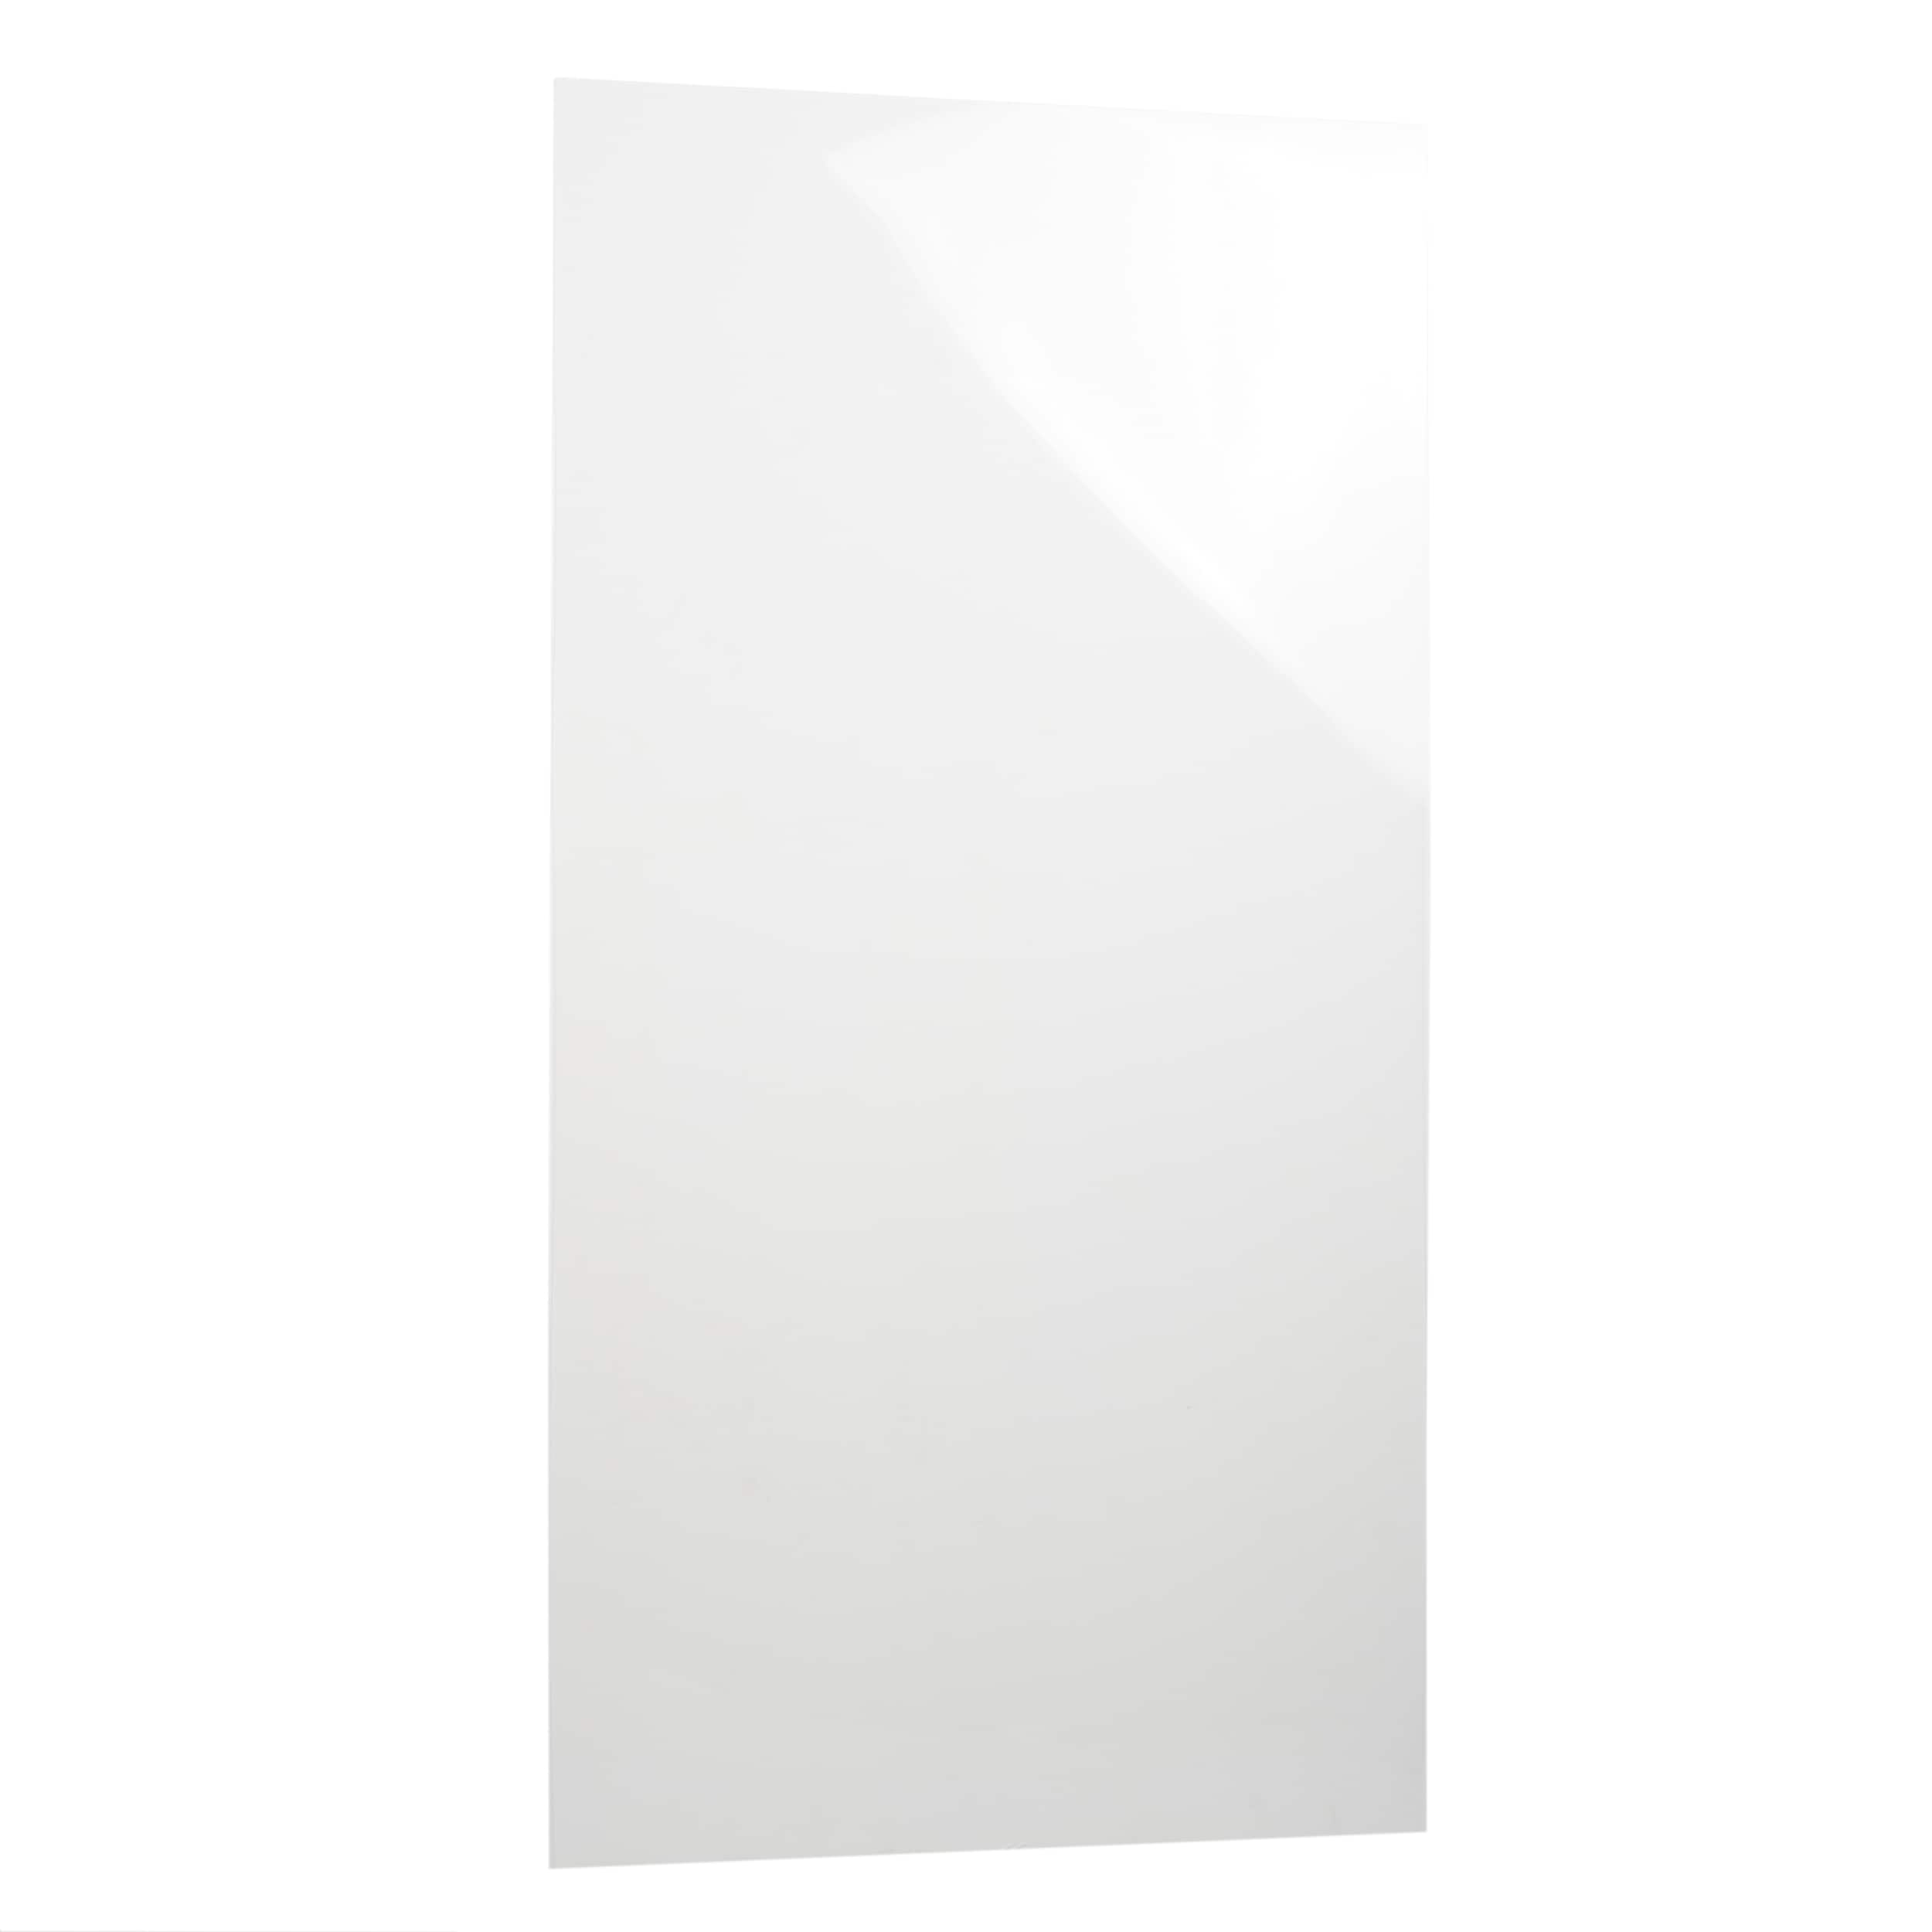 Deluxe Acrylic Mirror Sheet 12 x 8 Great for Craft Projects